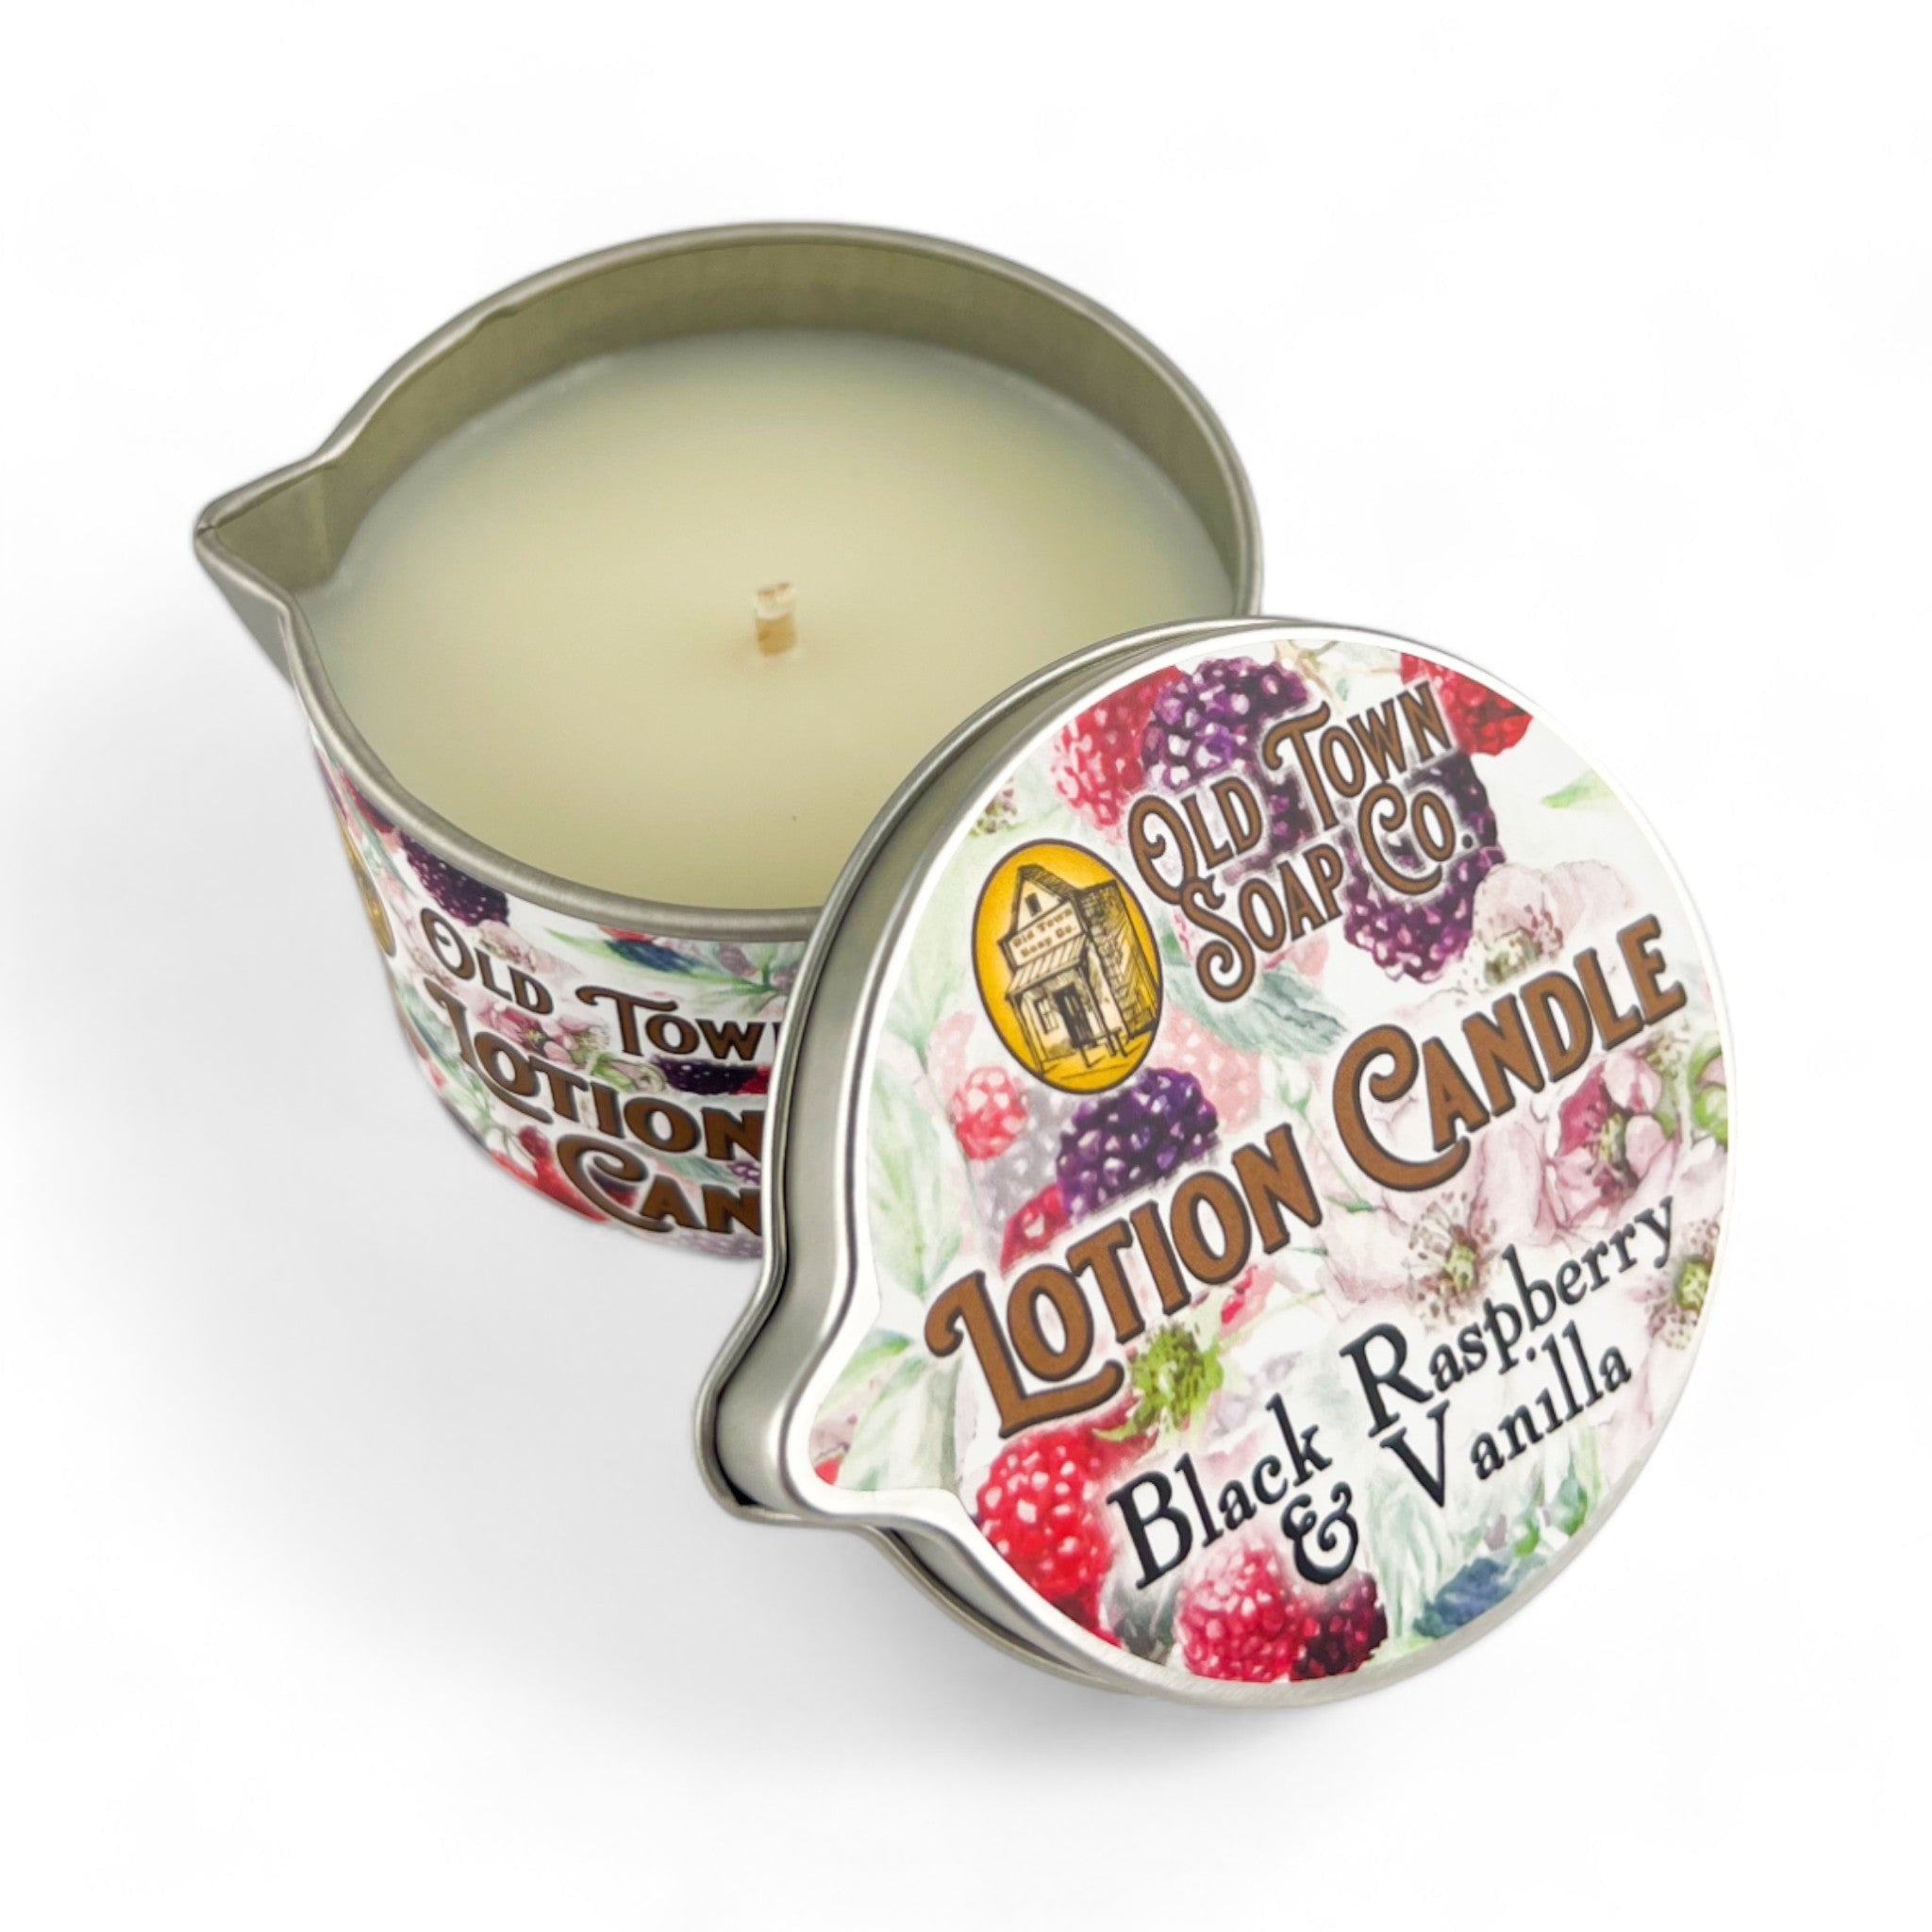 Black Raspberry &amp; Vanilla -Lotion Candles - Old Town Soap Co.